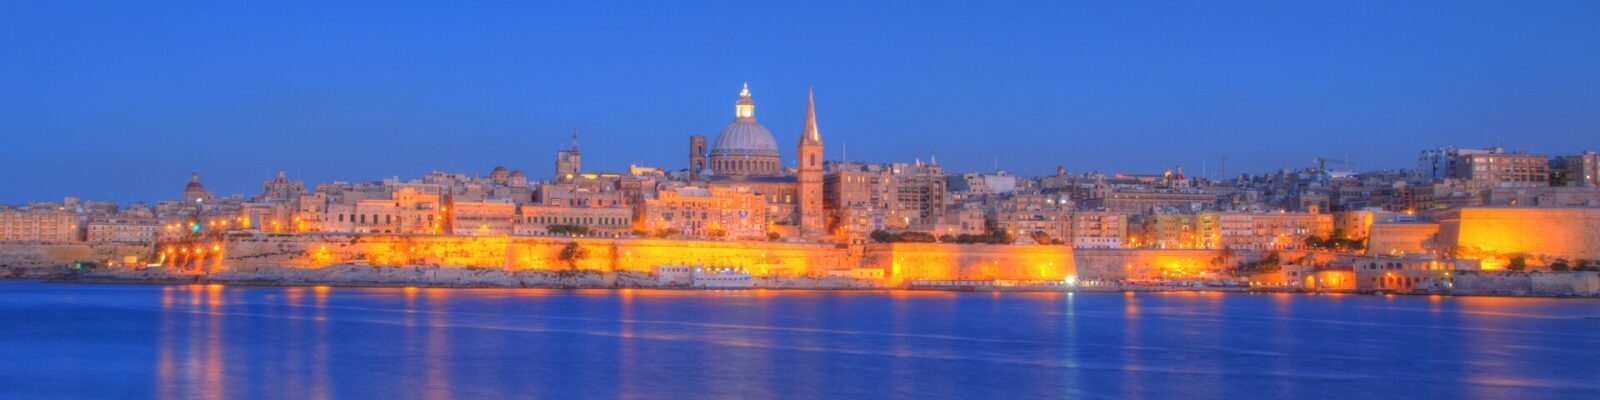 Small and mighty: What is there to do in Malta?